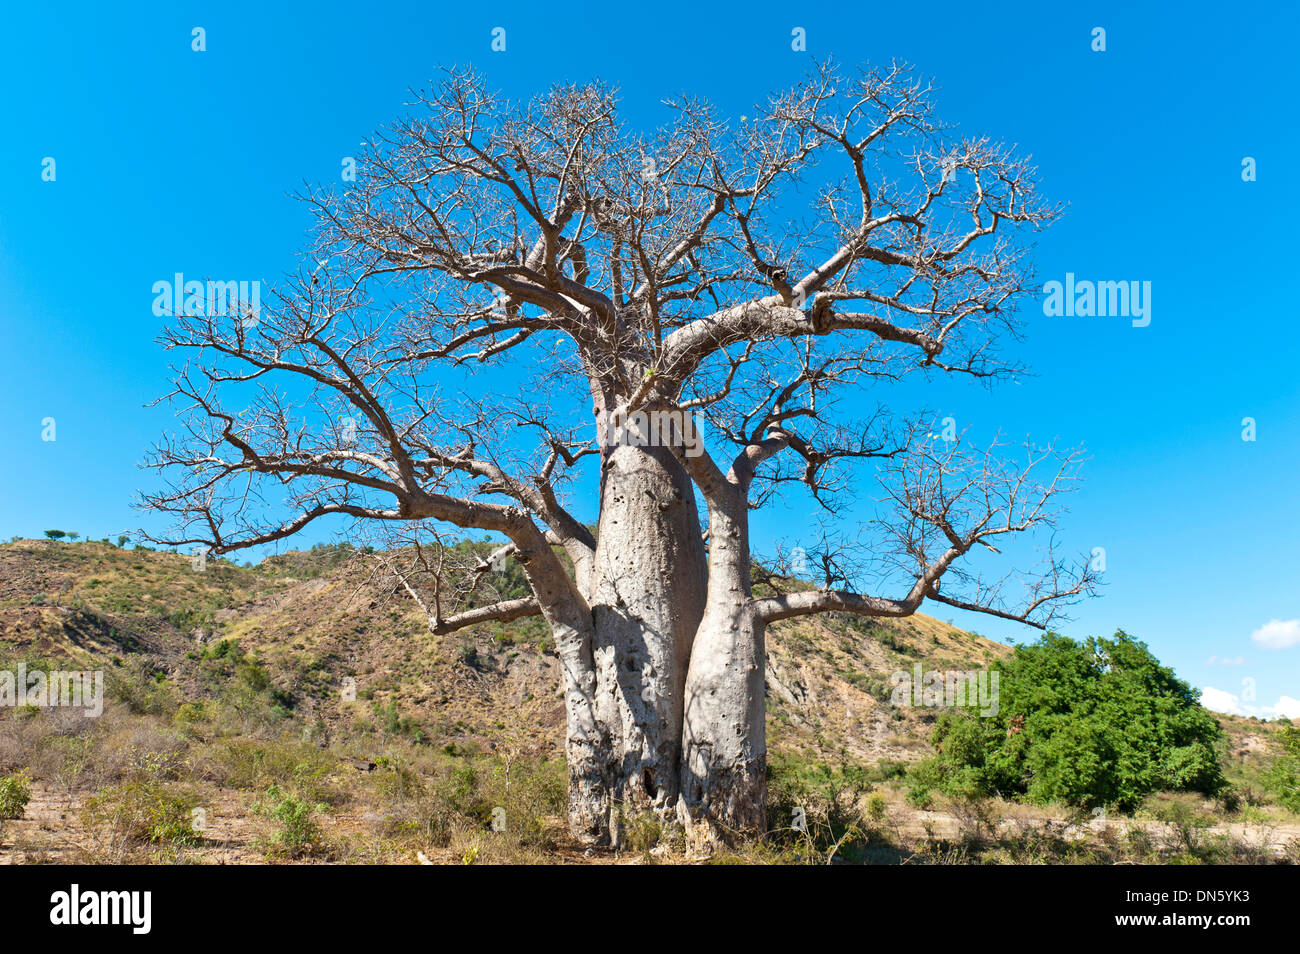 Solitary thick Baobab tree (Adansonia digitata) with strong branches, near Tulear or Toliara, Madagascar Stock Photo